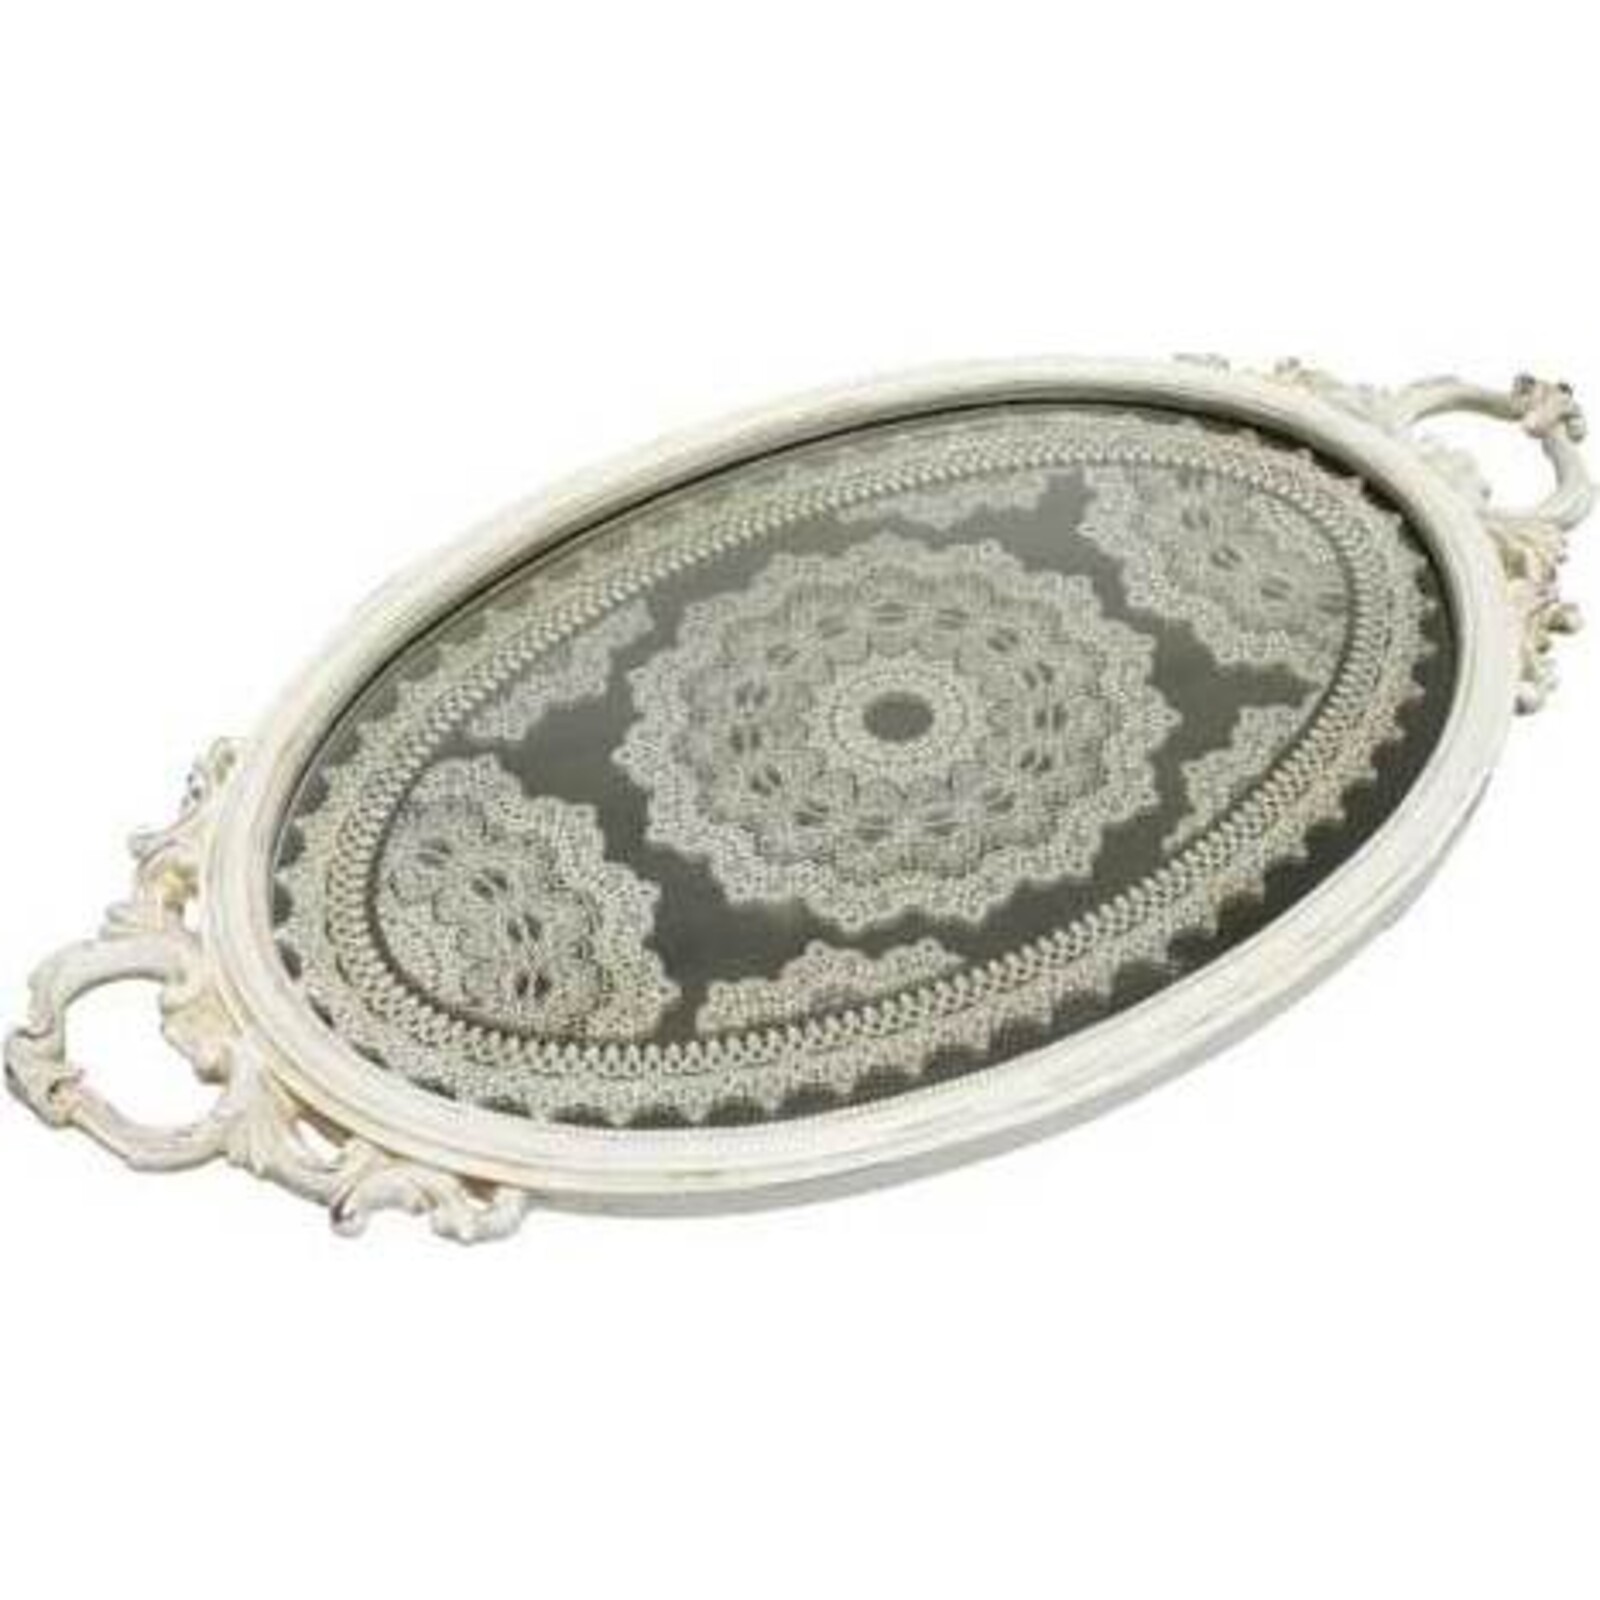 Ornate Tray with Etched Mirror